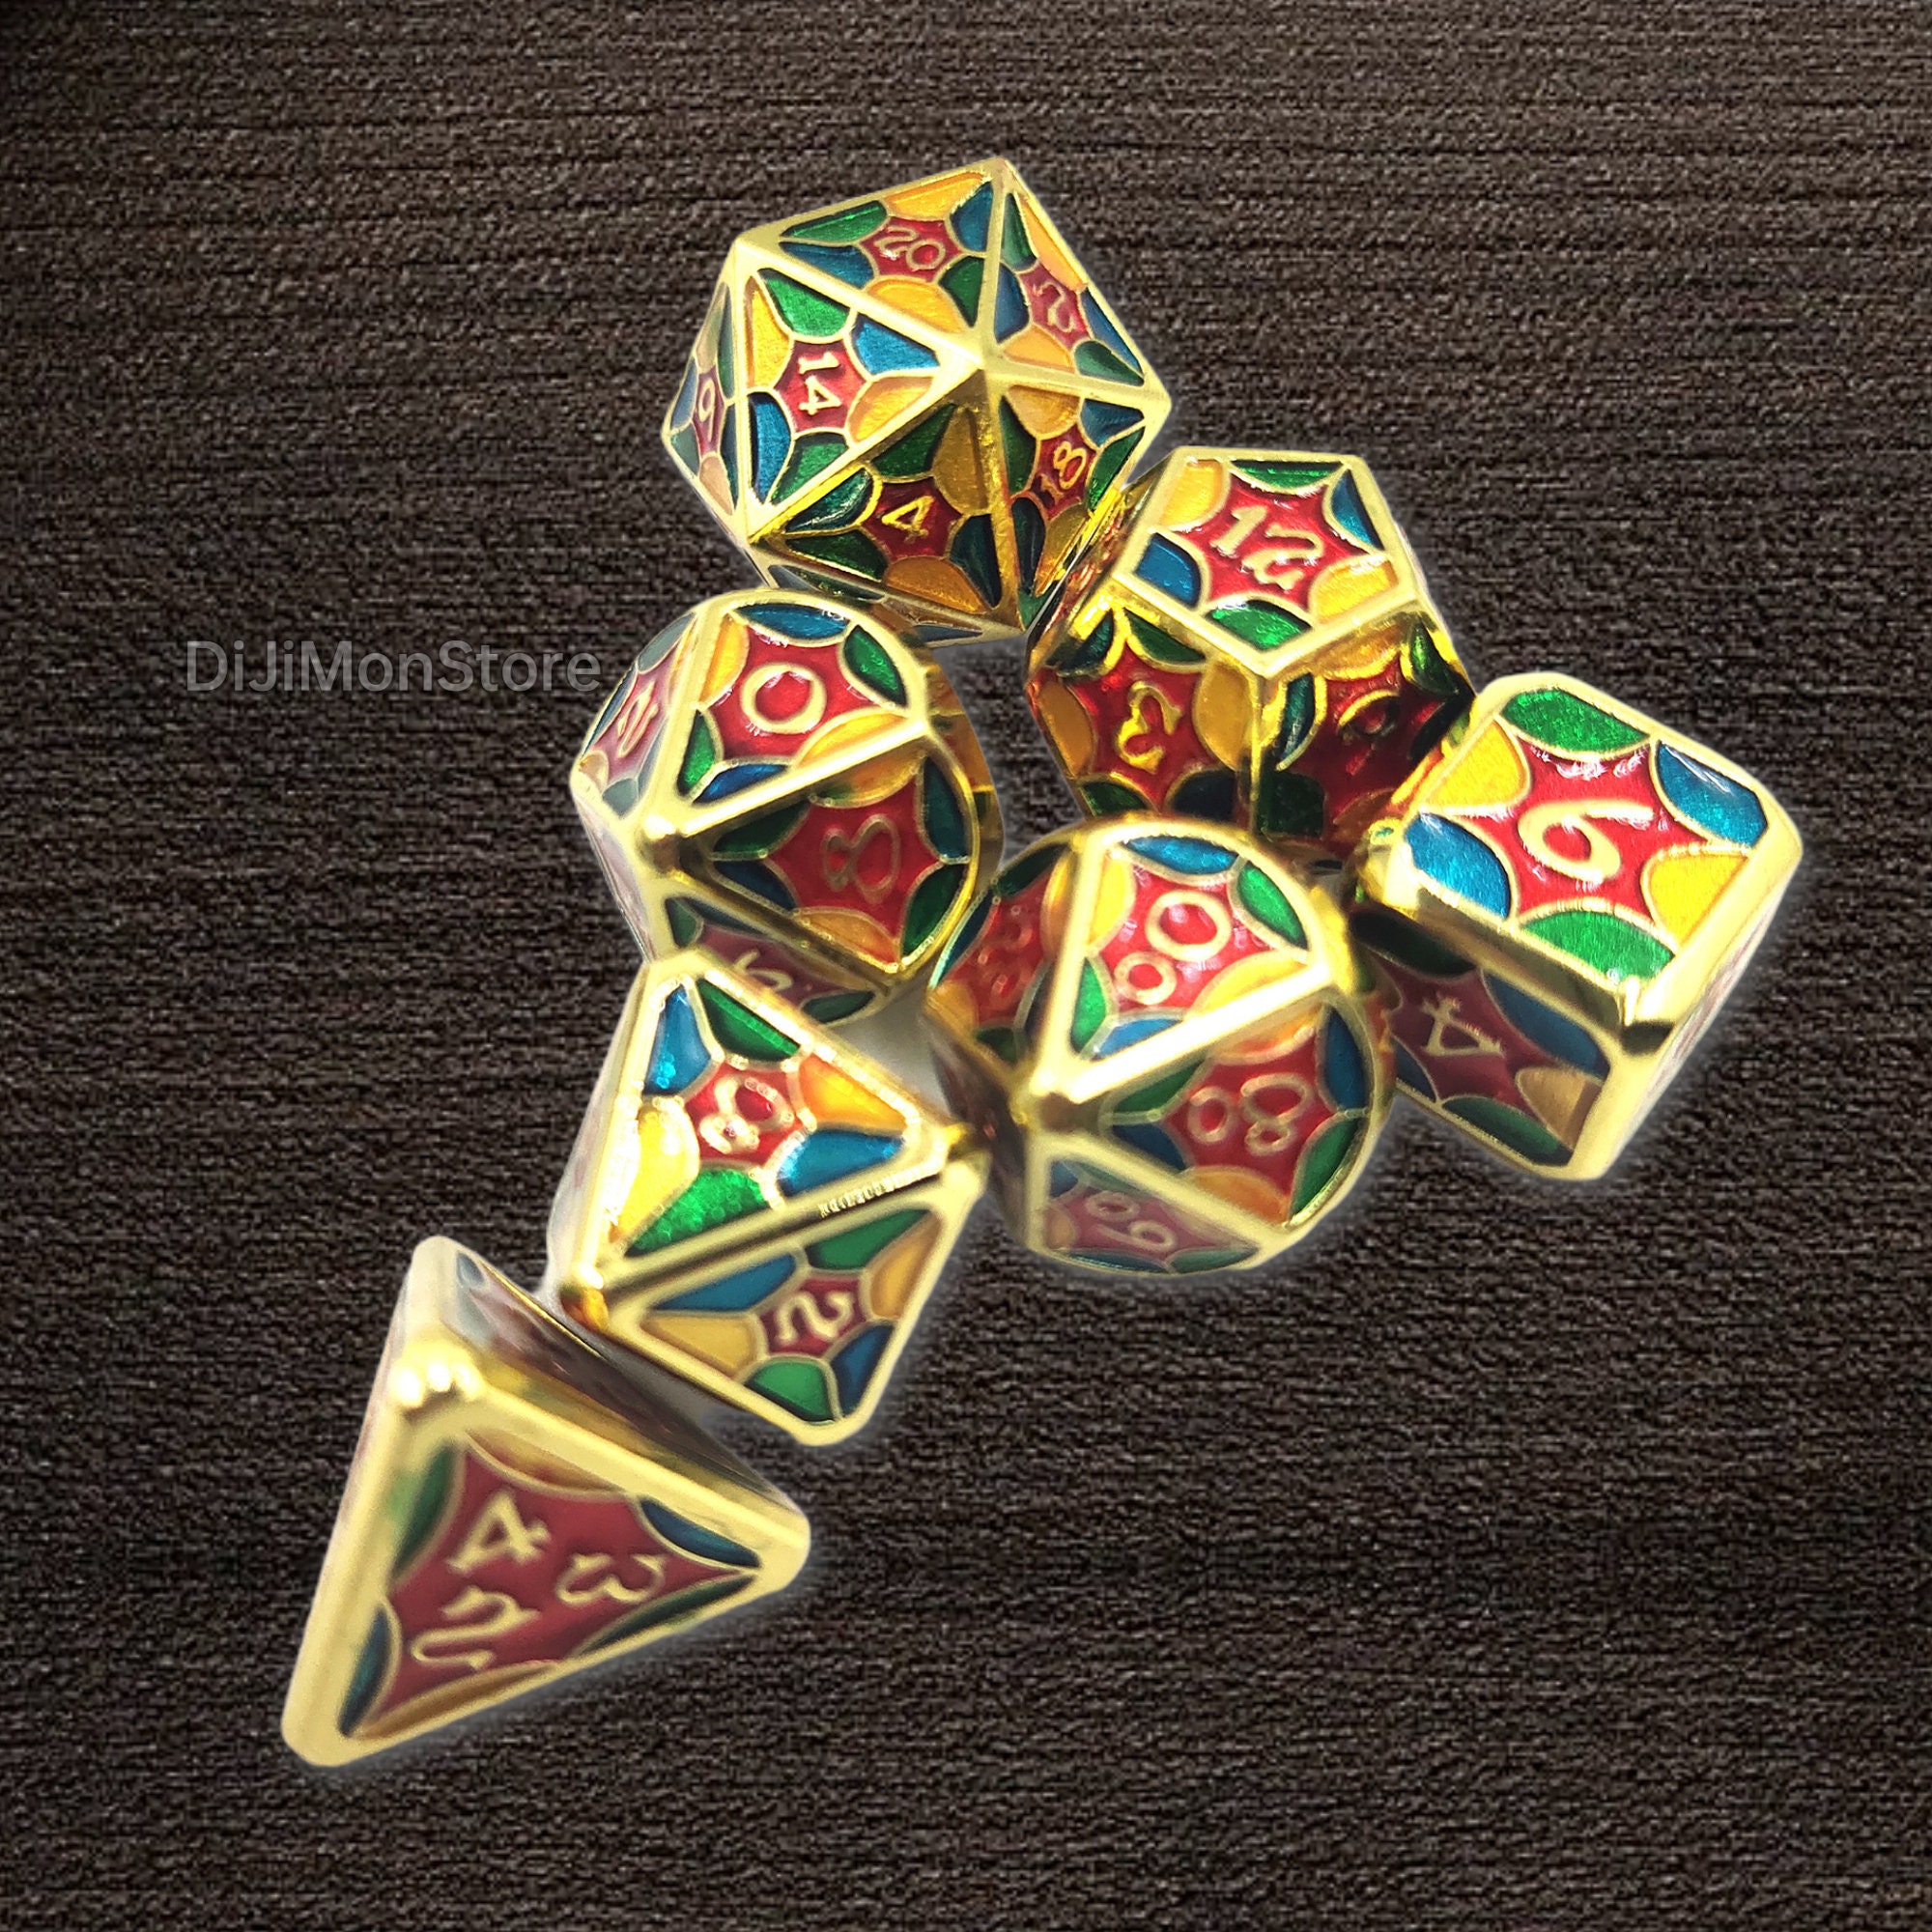 19 Styles Dice Mold-trpg Silicone Dice Mold-polyhedral Dice Mold